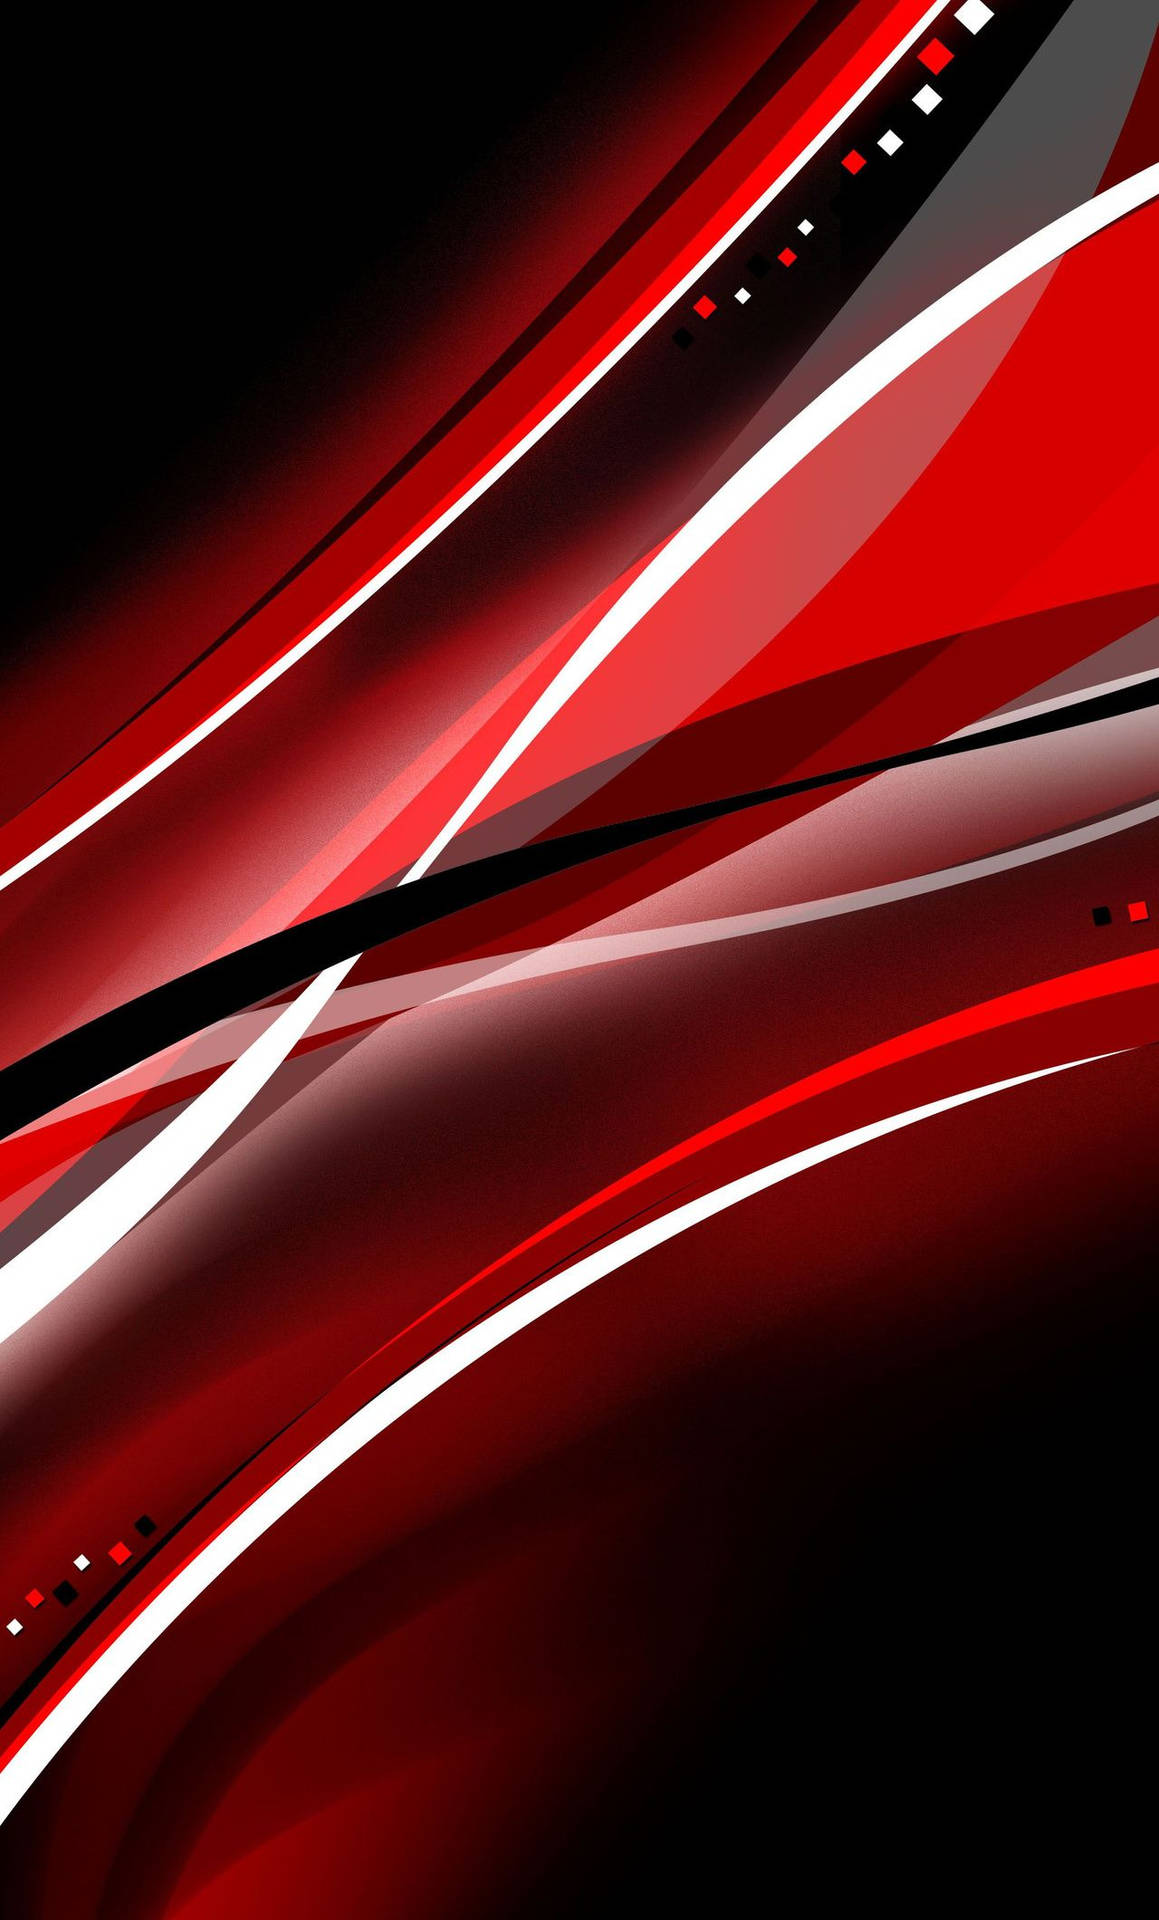 Futuristic Flow Red And Black Iphone Wallpaper